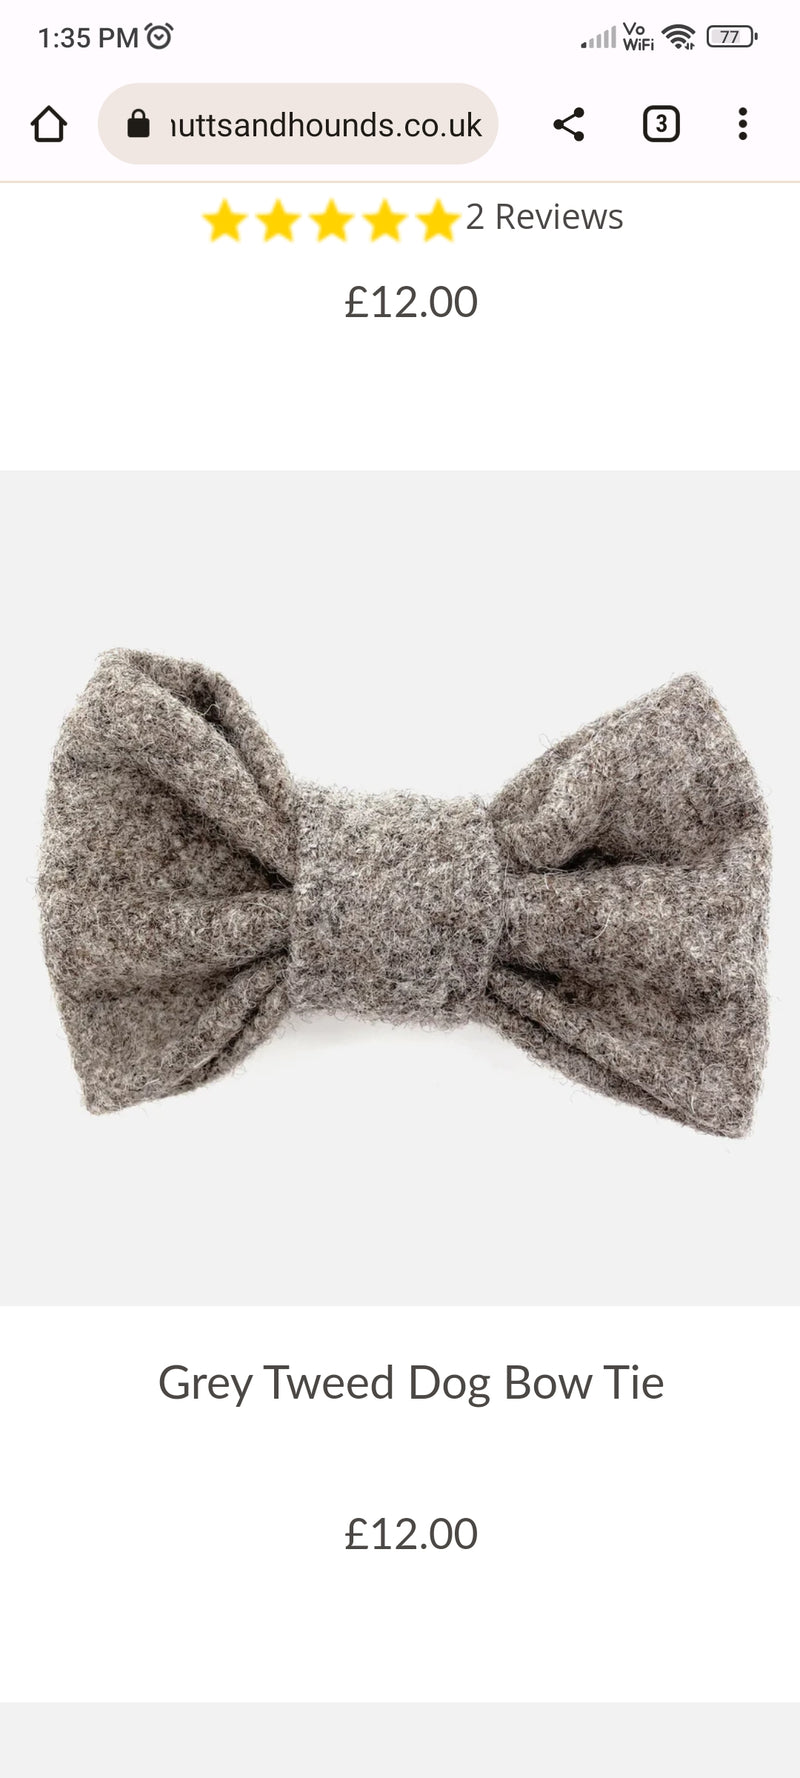 Grey Tweed Dog Bow Tie

- Mutts & Hounds